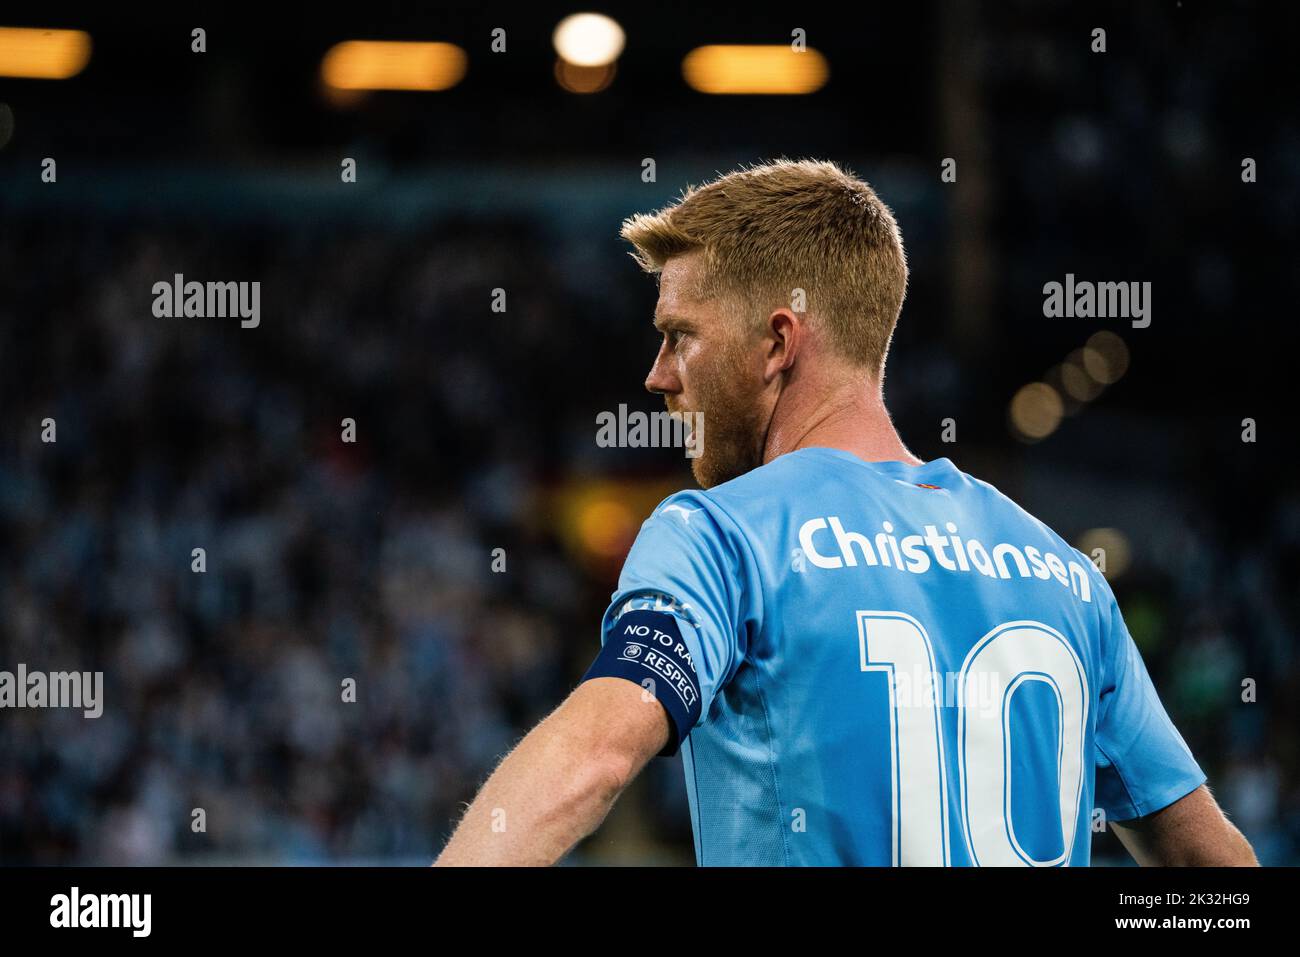 Malmoe, Sweden. 08th, September 2022. Anders Christiansen (10) of Malmö FF seen during the UEFA Europa League match between Malmö FF and Braga at Eleda Stadion in Malmö. (Photo credit: Gonzales Photo - Joe Miller). Stock Photo